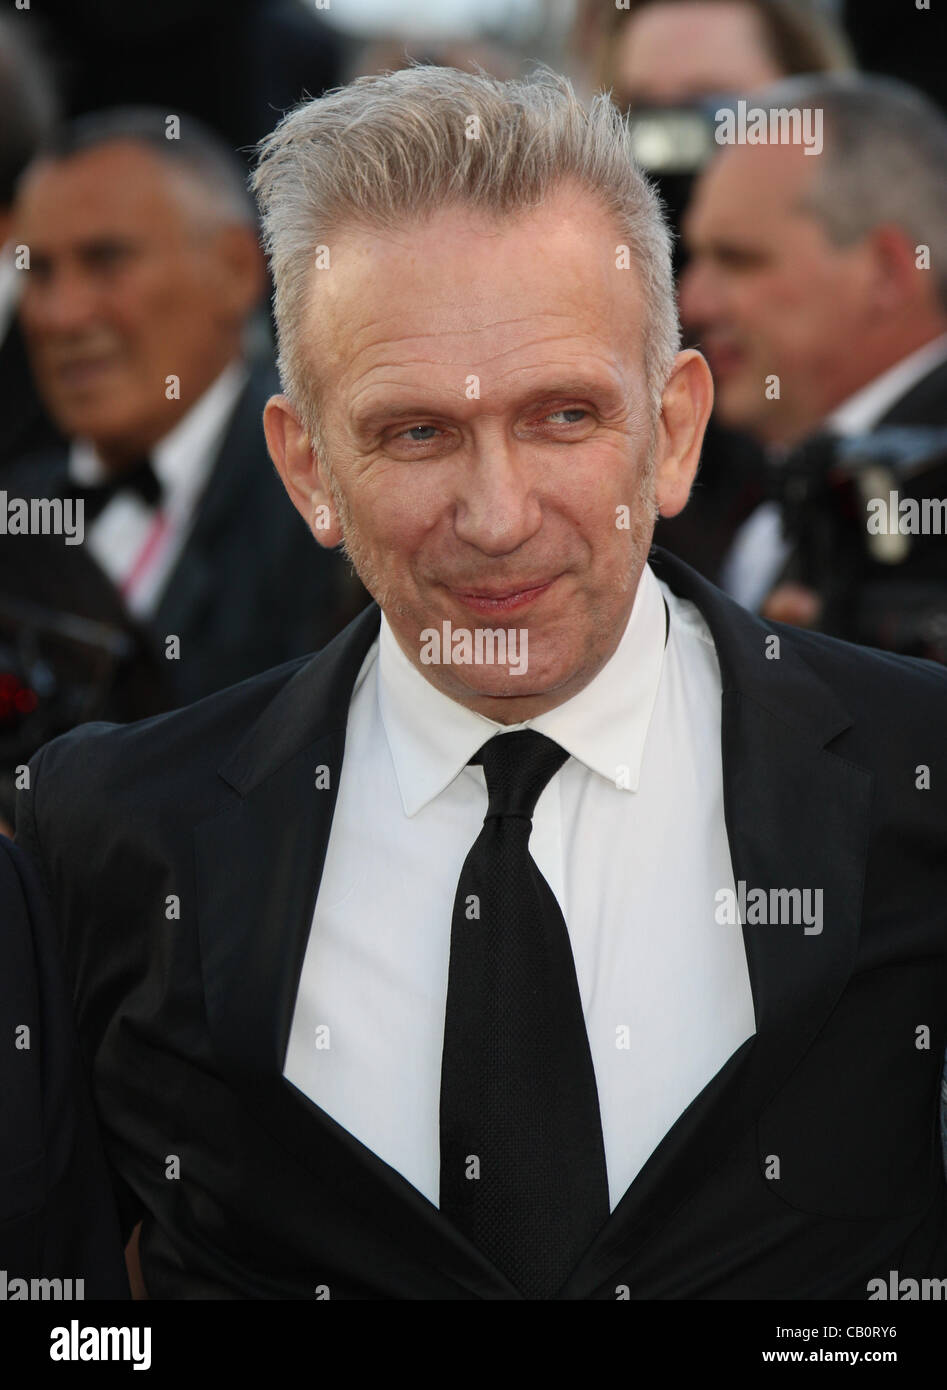 JEAN-PAUL GAULTIER THE MOONRISE KINGDOM PREMIERE & OPENING NIGHT CANNES ...